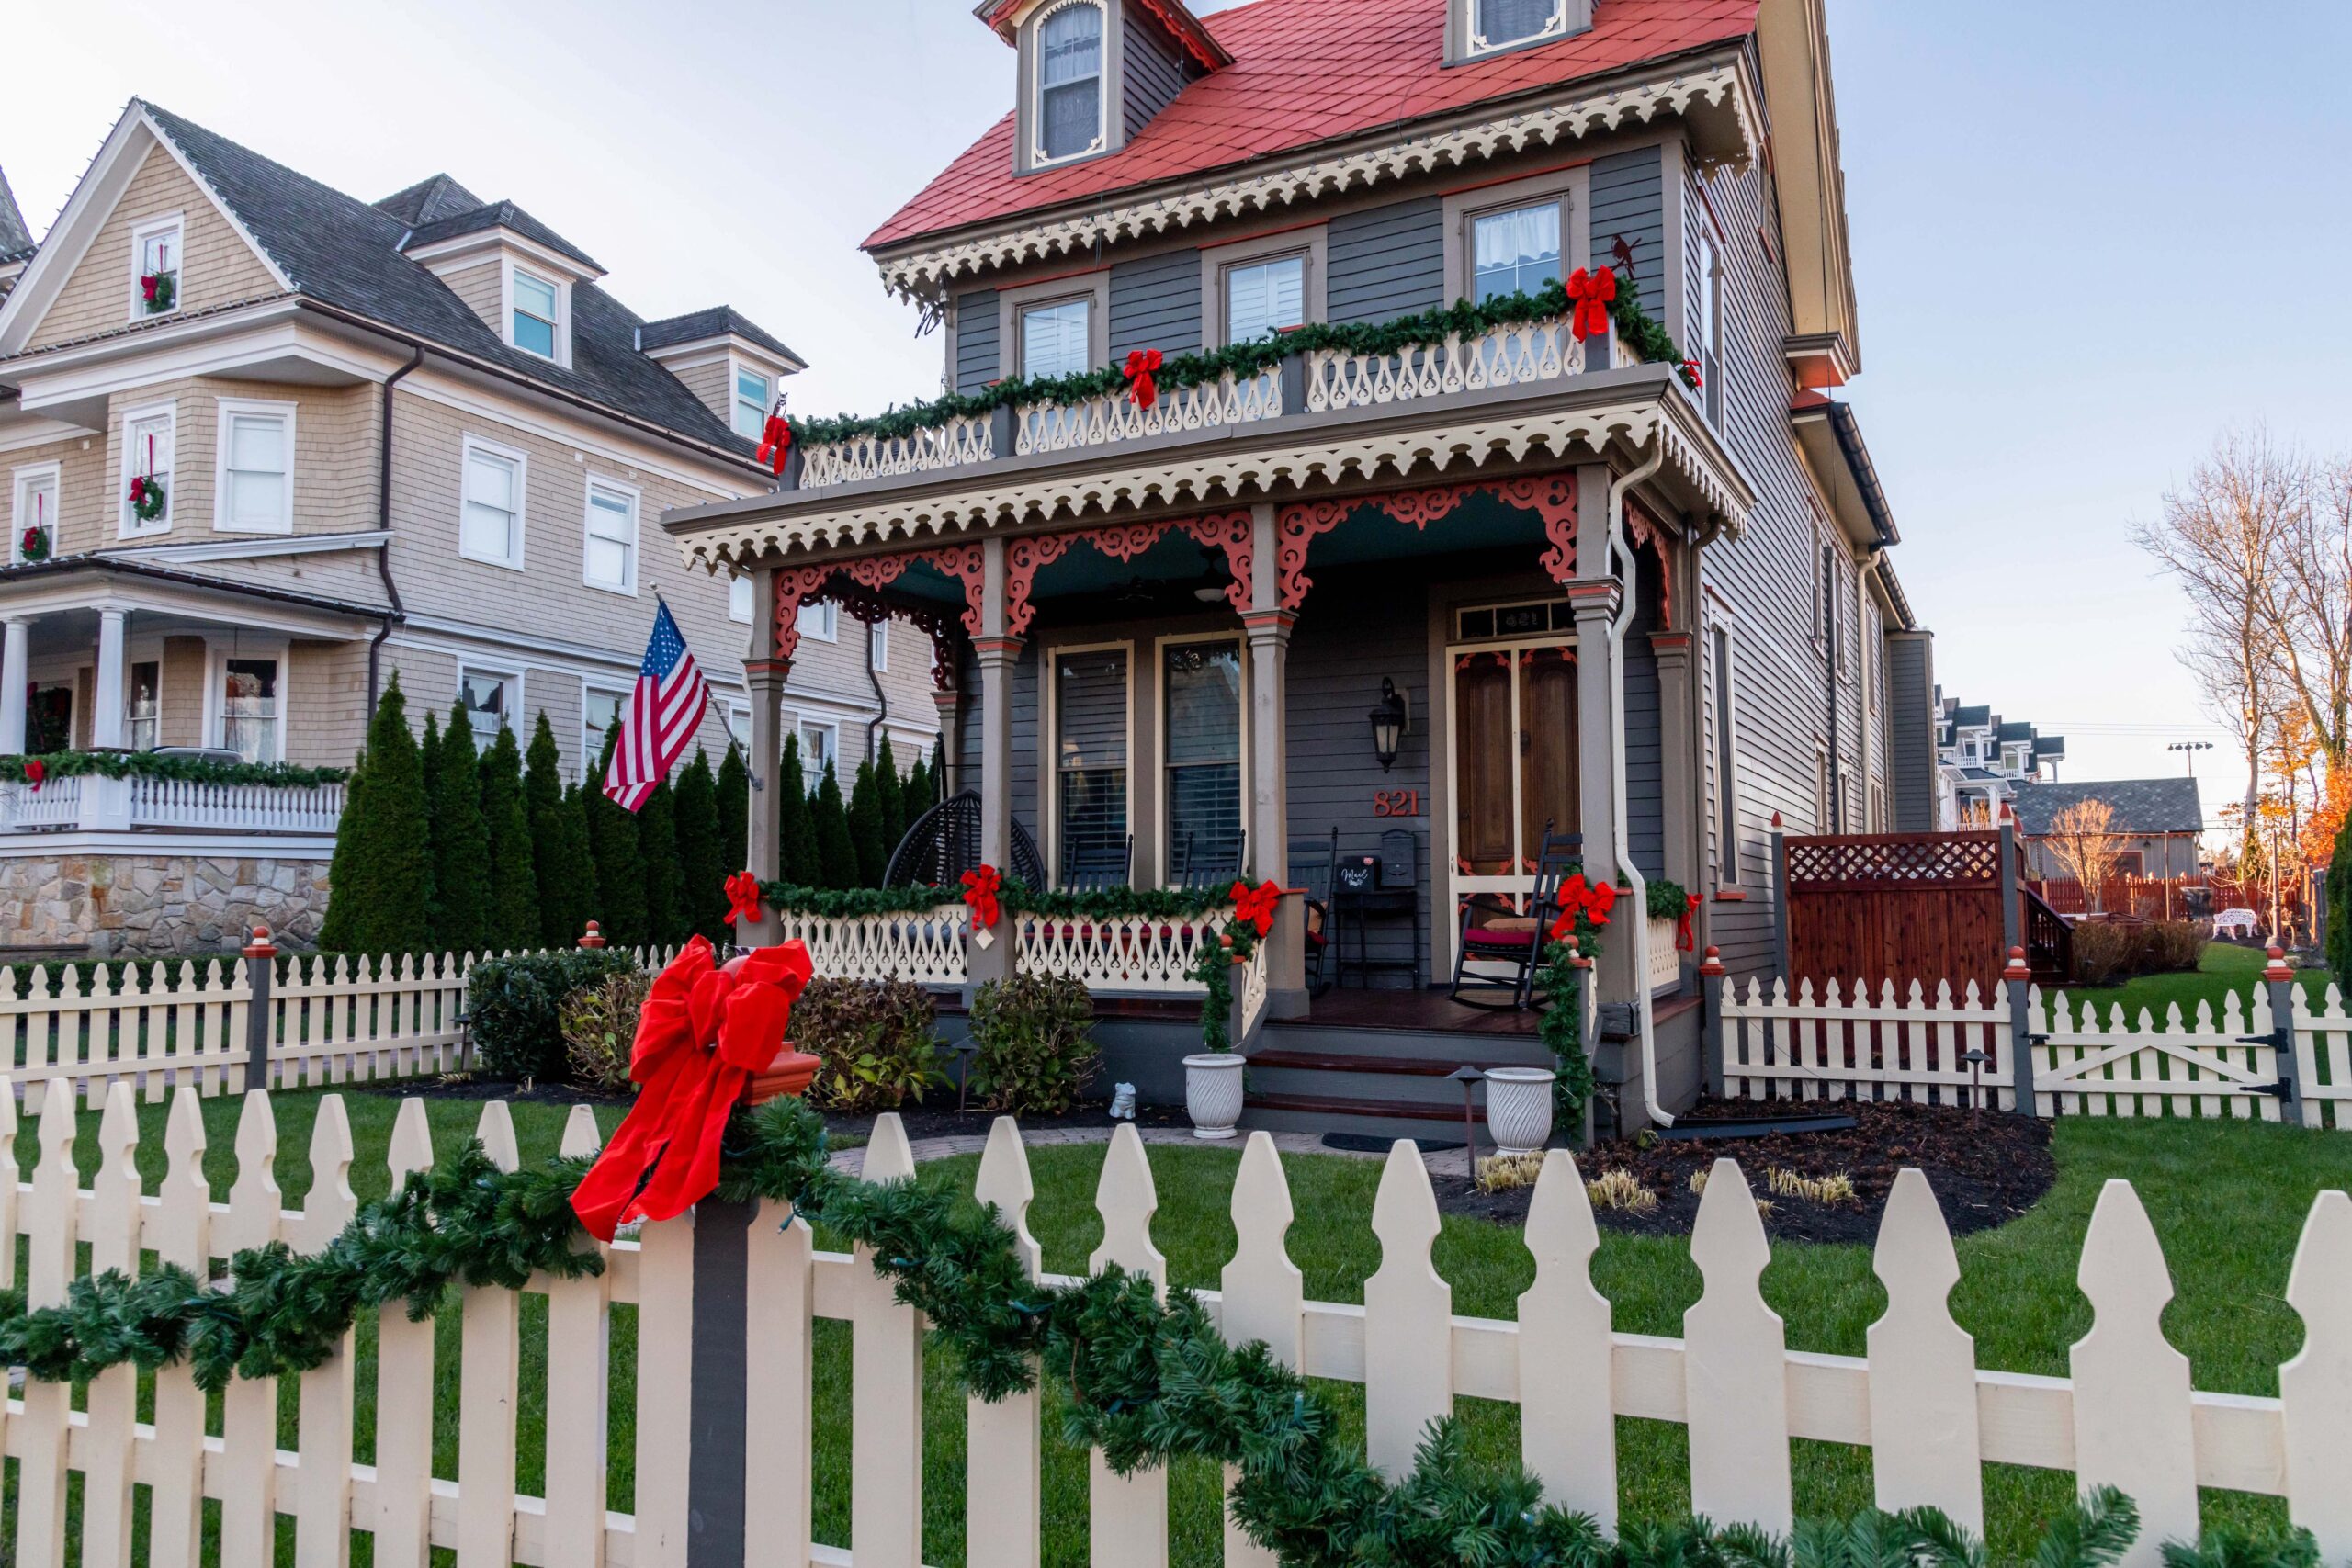 Red bows and green garland hung up on the fence and the porch railings of a red, gray, and pale yellow Victorian style house with a clear blue sky